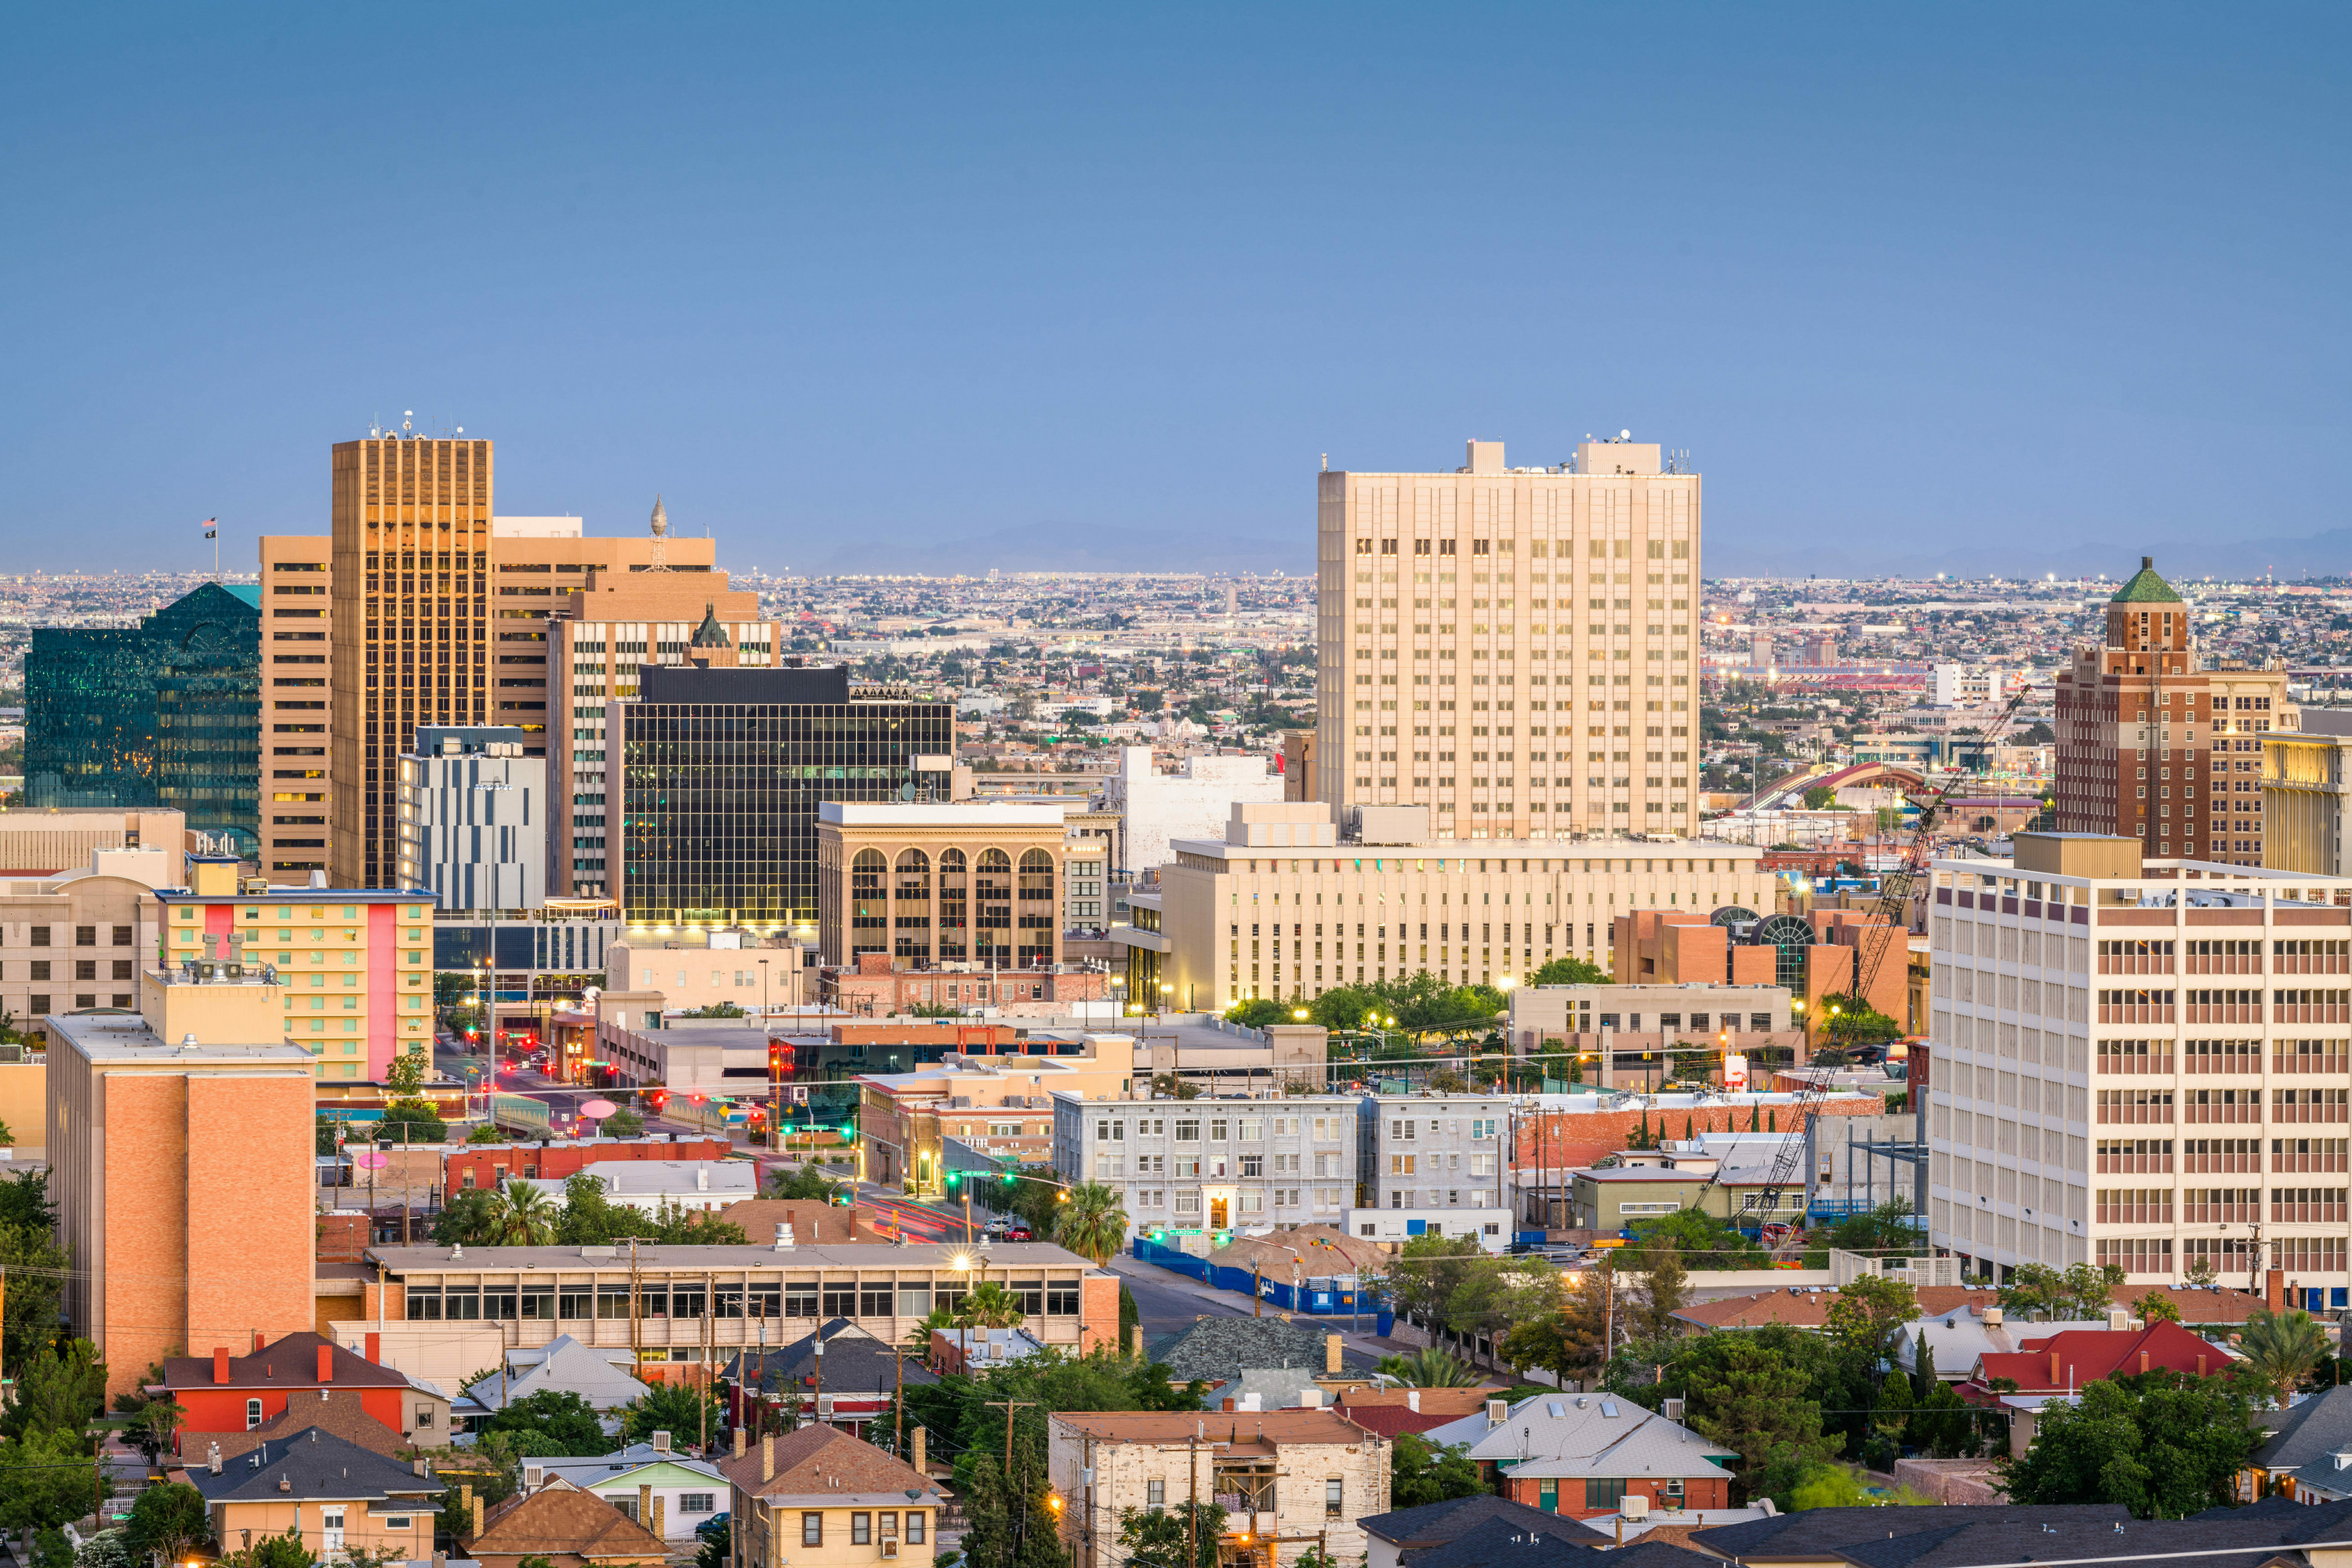 El Paso, Texas | 100 Up-and-Coming Real Estate Markets to Watch in 2020 | Buildium